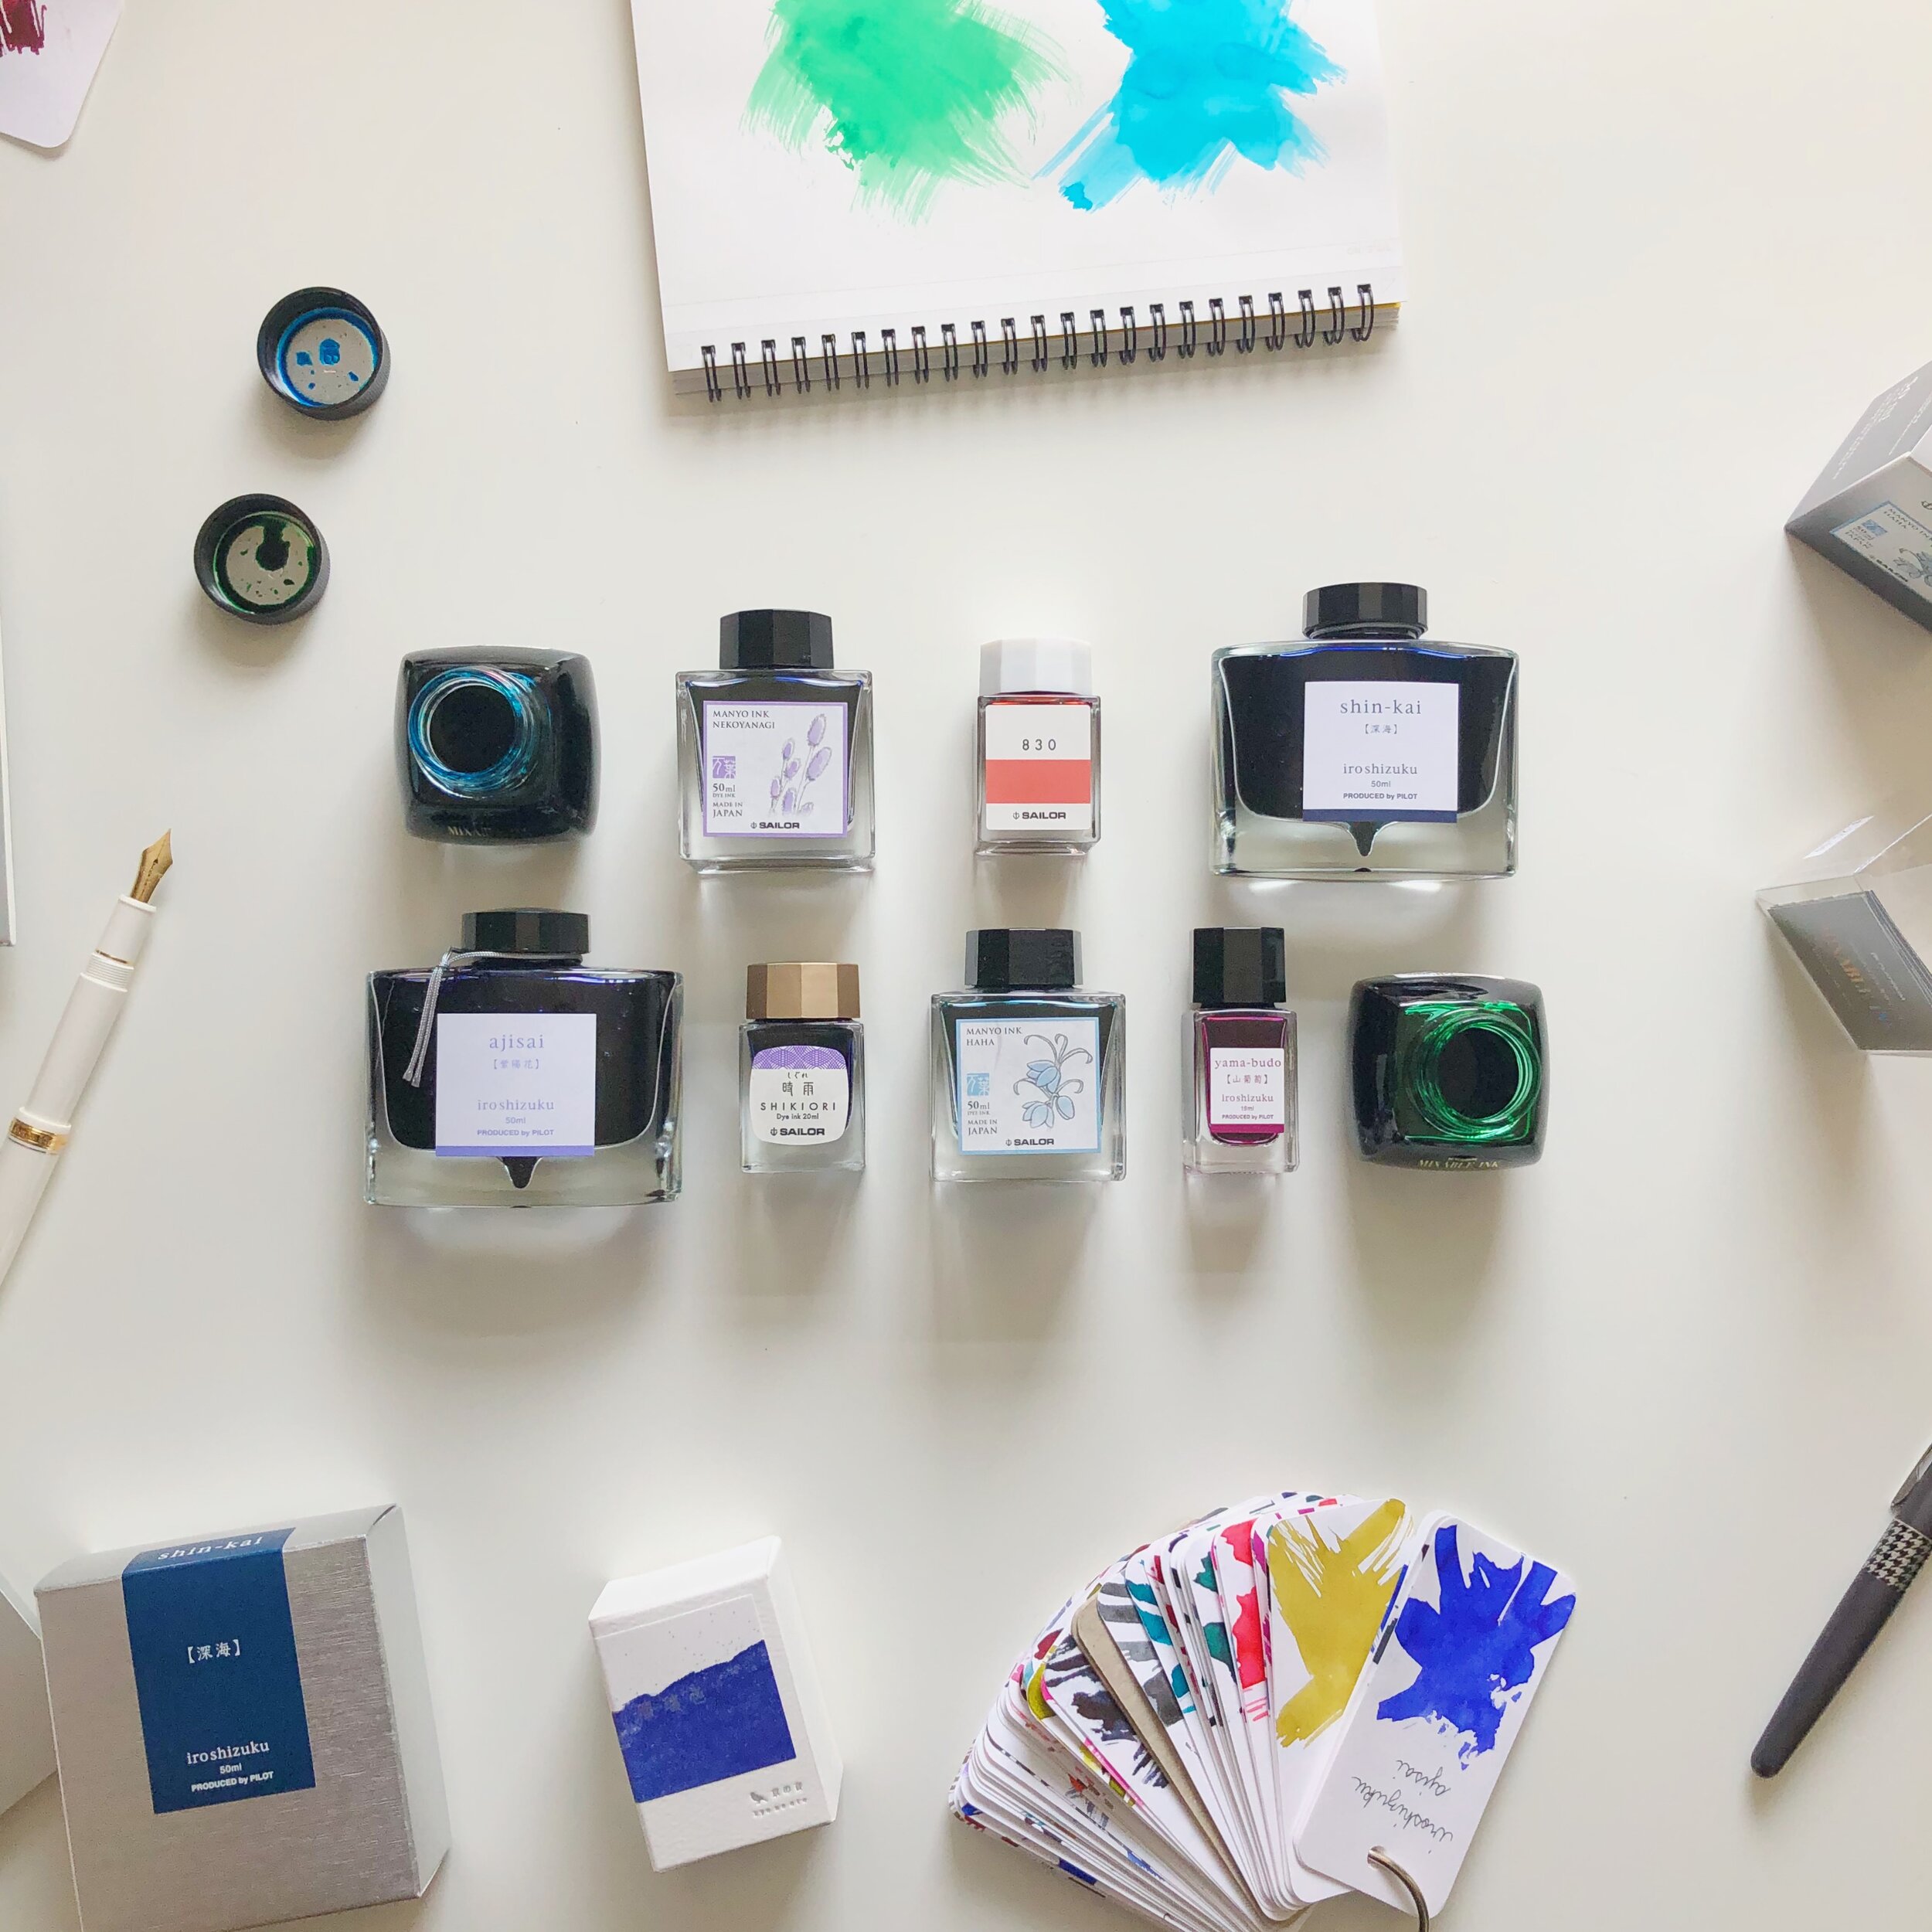 Personalizing a Fountain Pen: Ink & Paper — Japanese Cultural